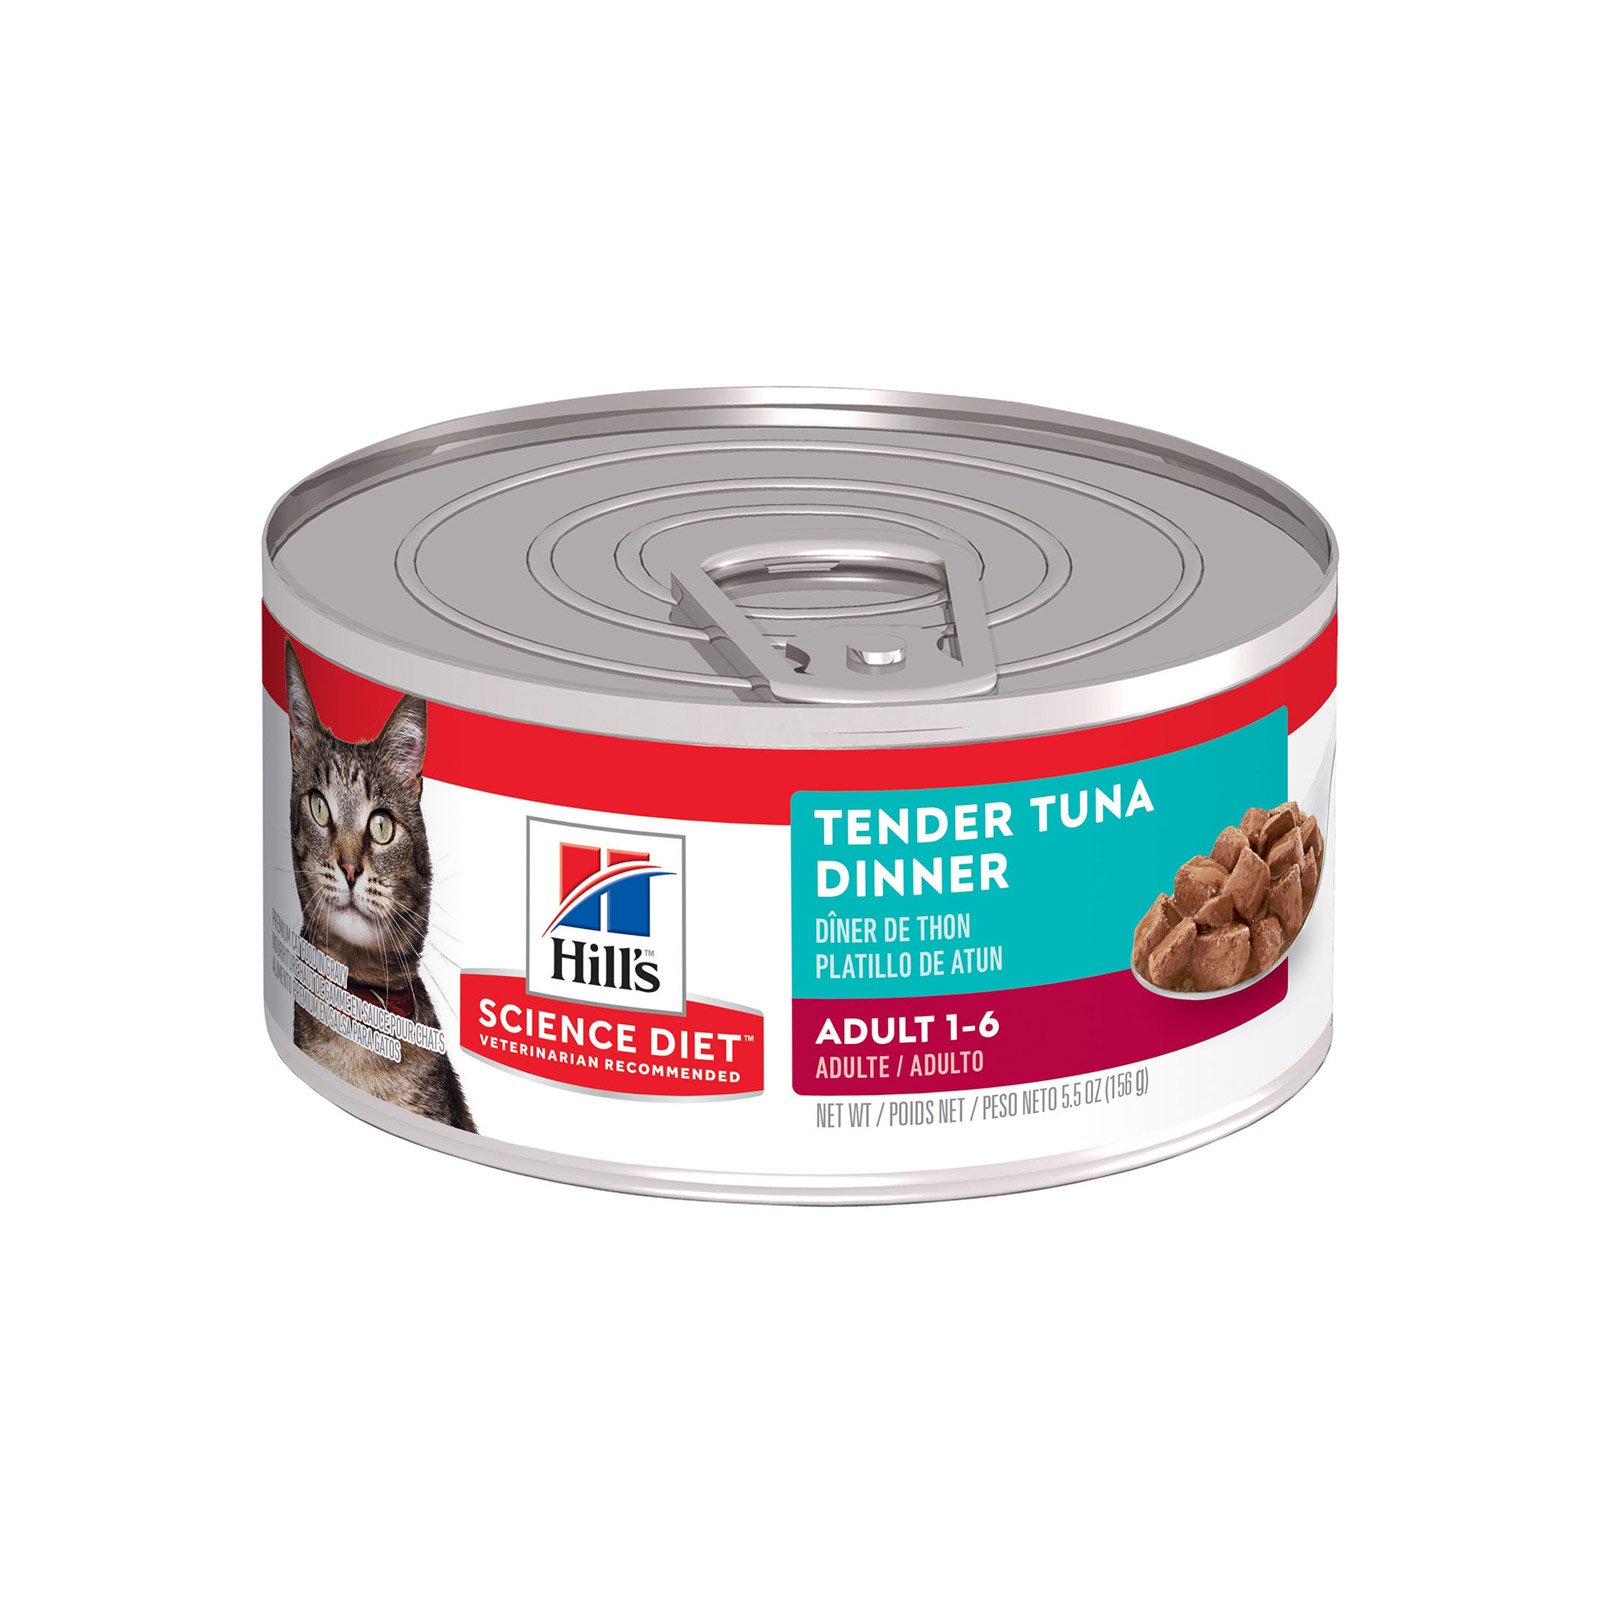 Hill's Science Diet Adult Tender Tuna Dinner Canned Wet Cat Food